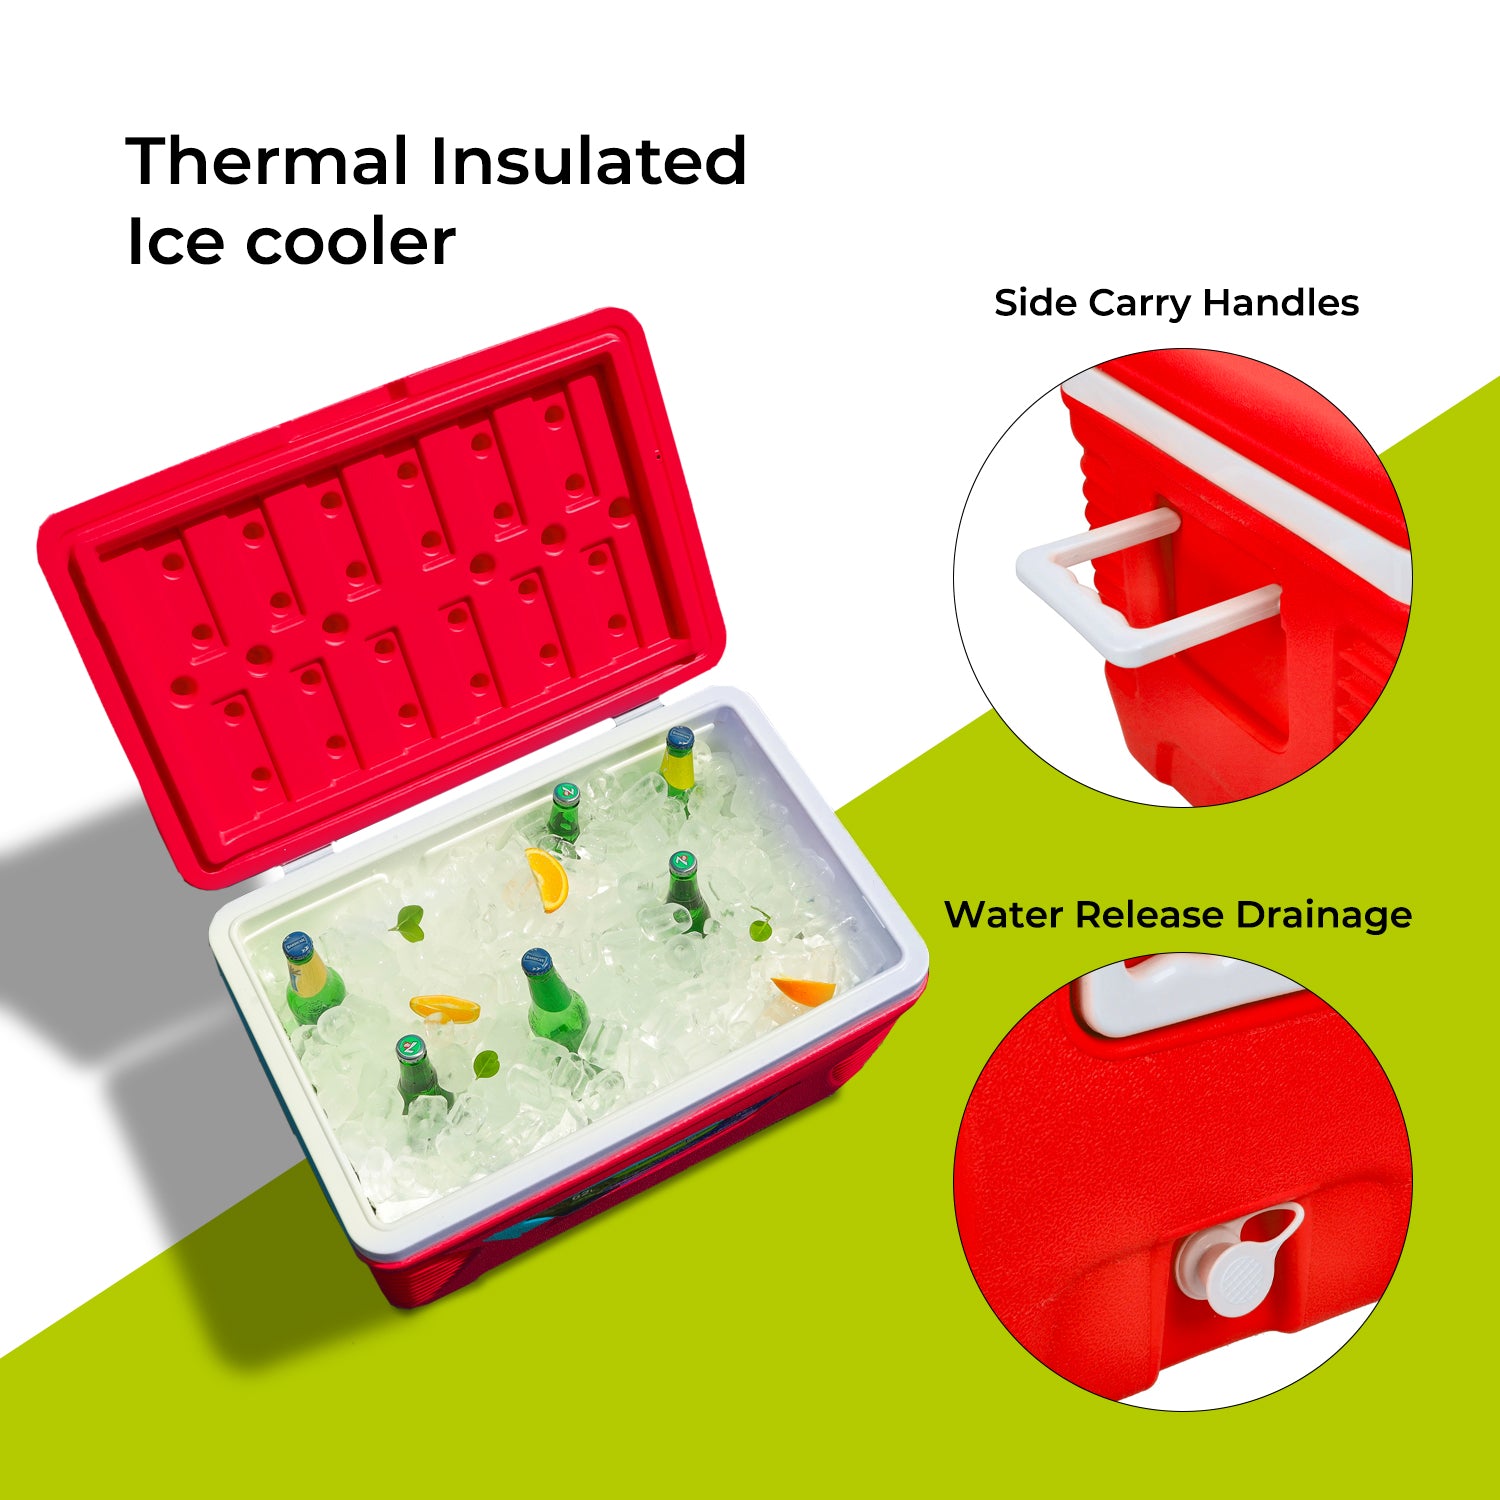 Insulated Ice Cooler Box - 62Ltr